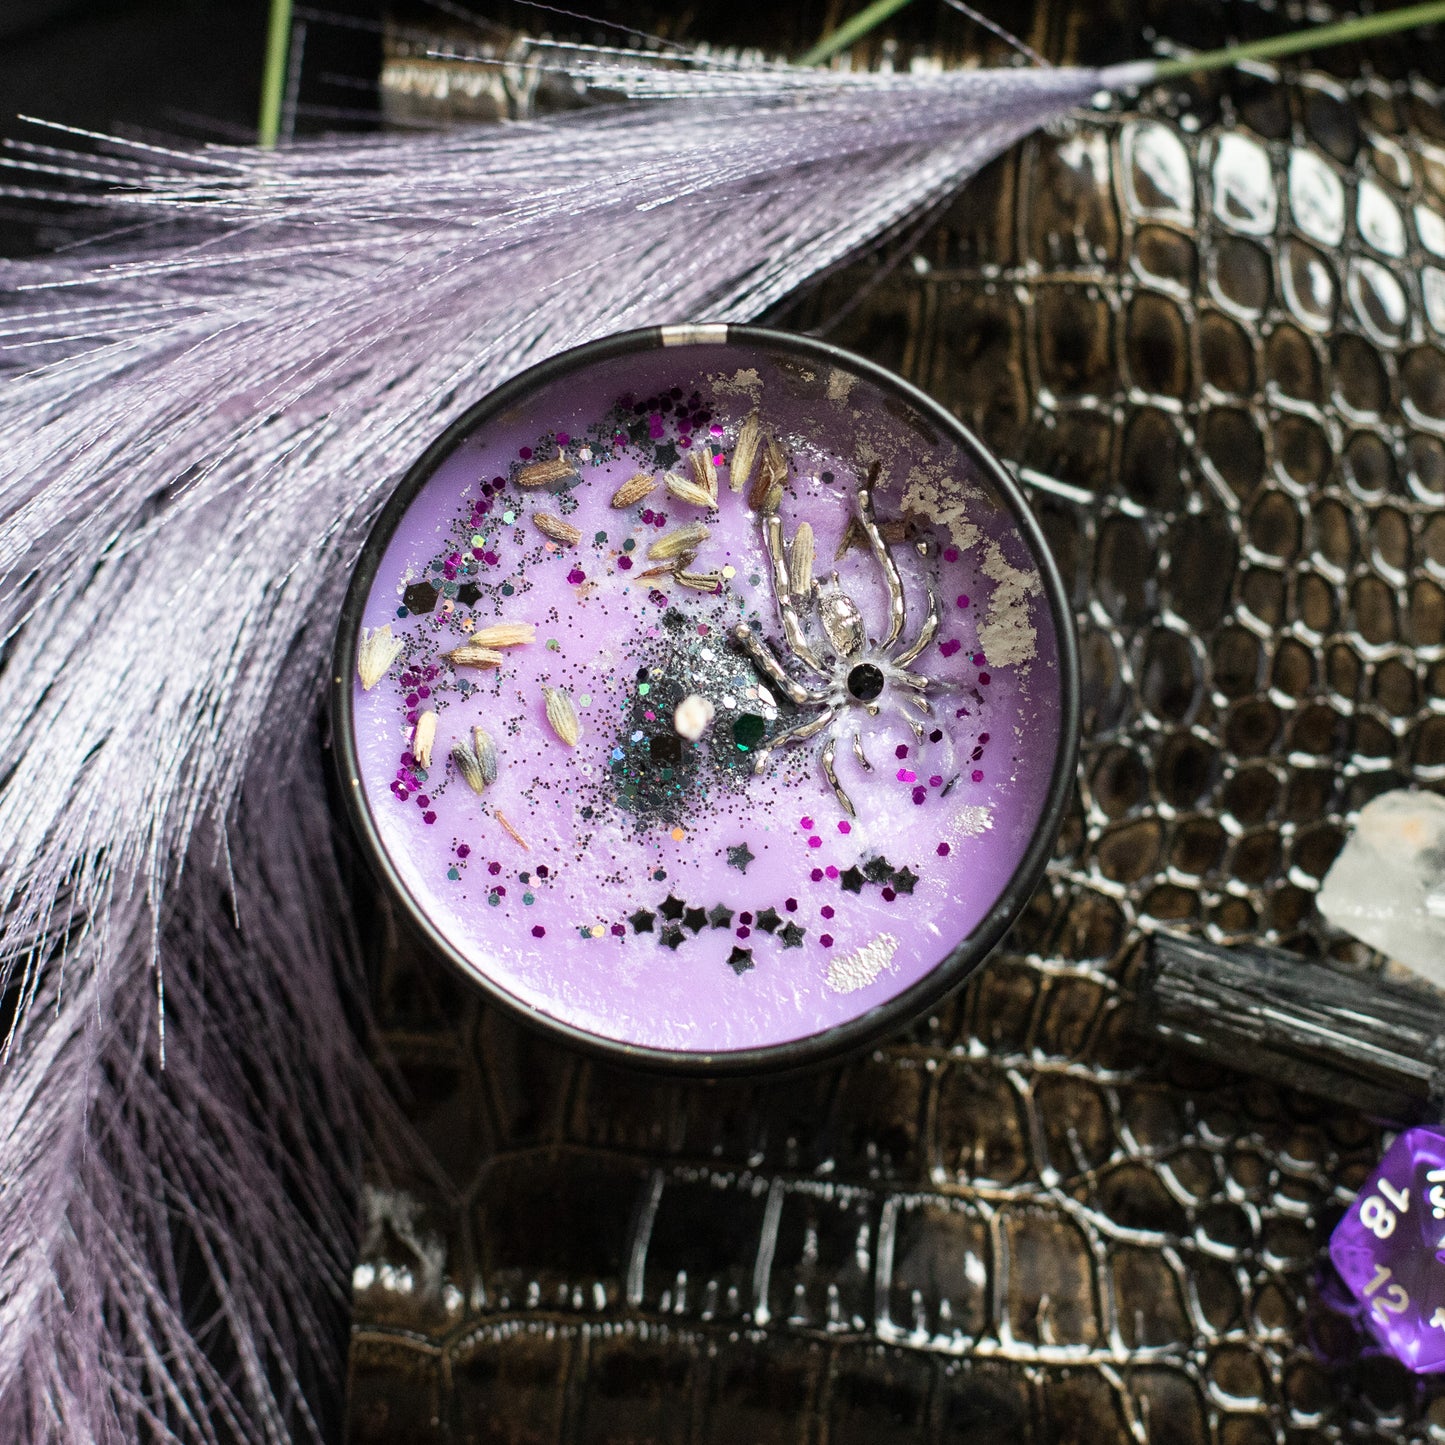 Minthara inspired candle - 'Veil of Lolth' Baldurs Gate 3 inspired soy Candles 100 ML